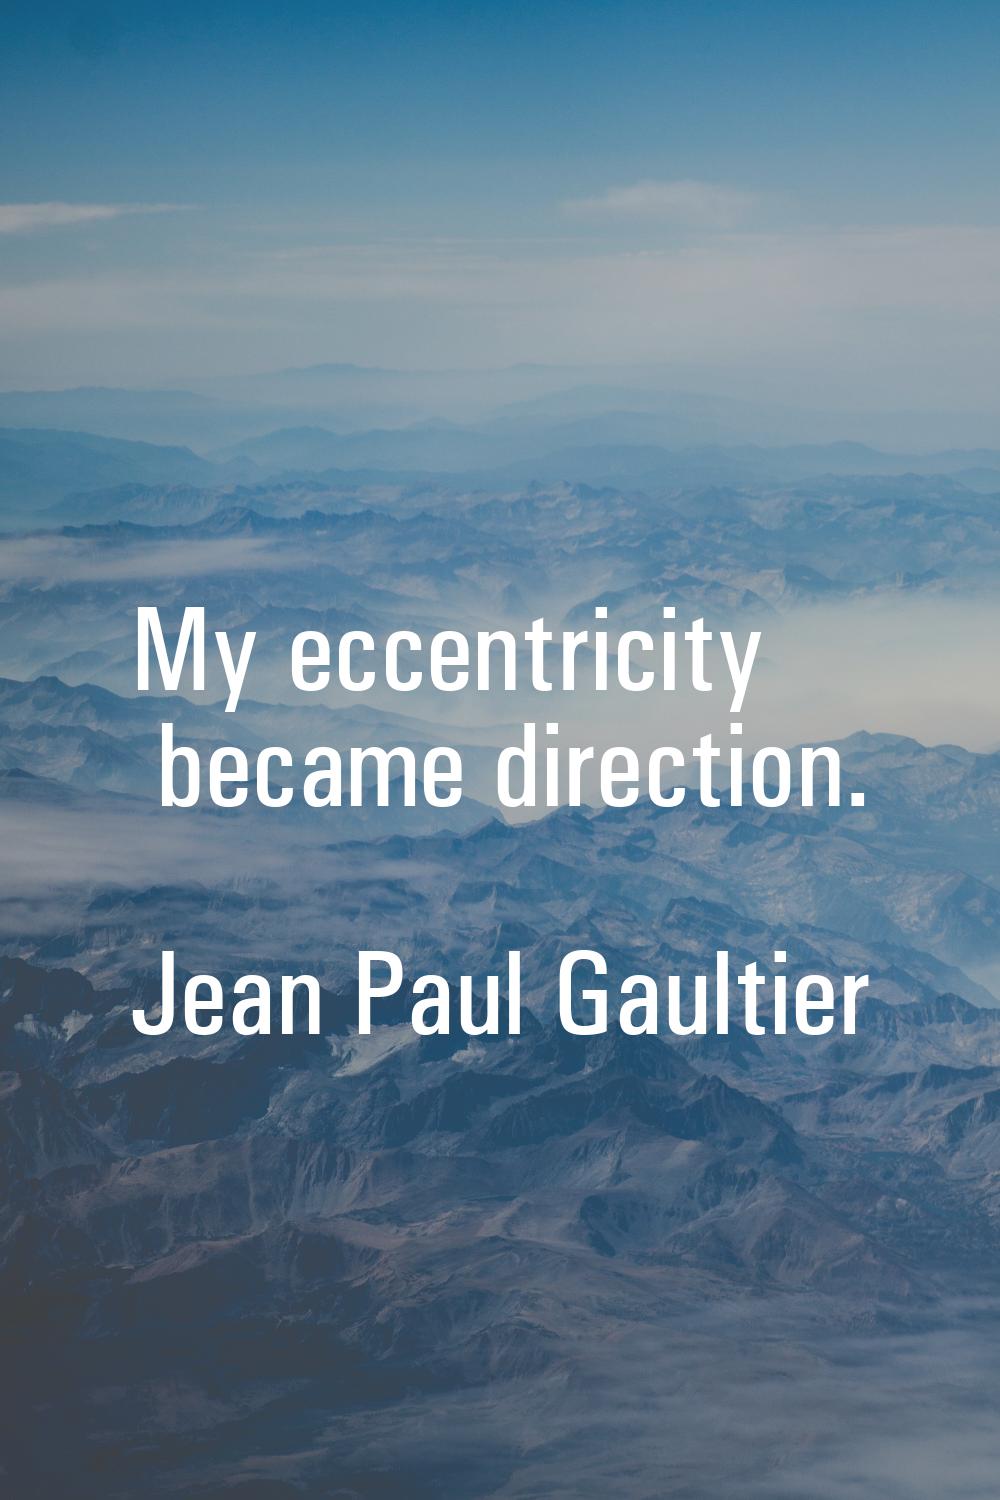 My eccentricity became direction.